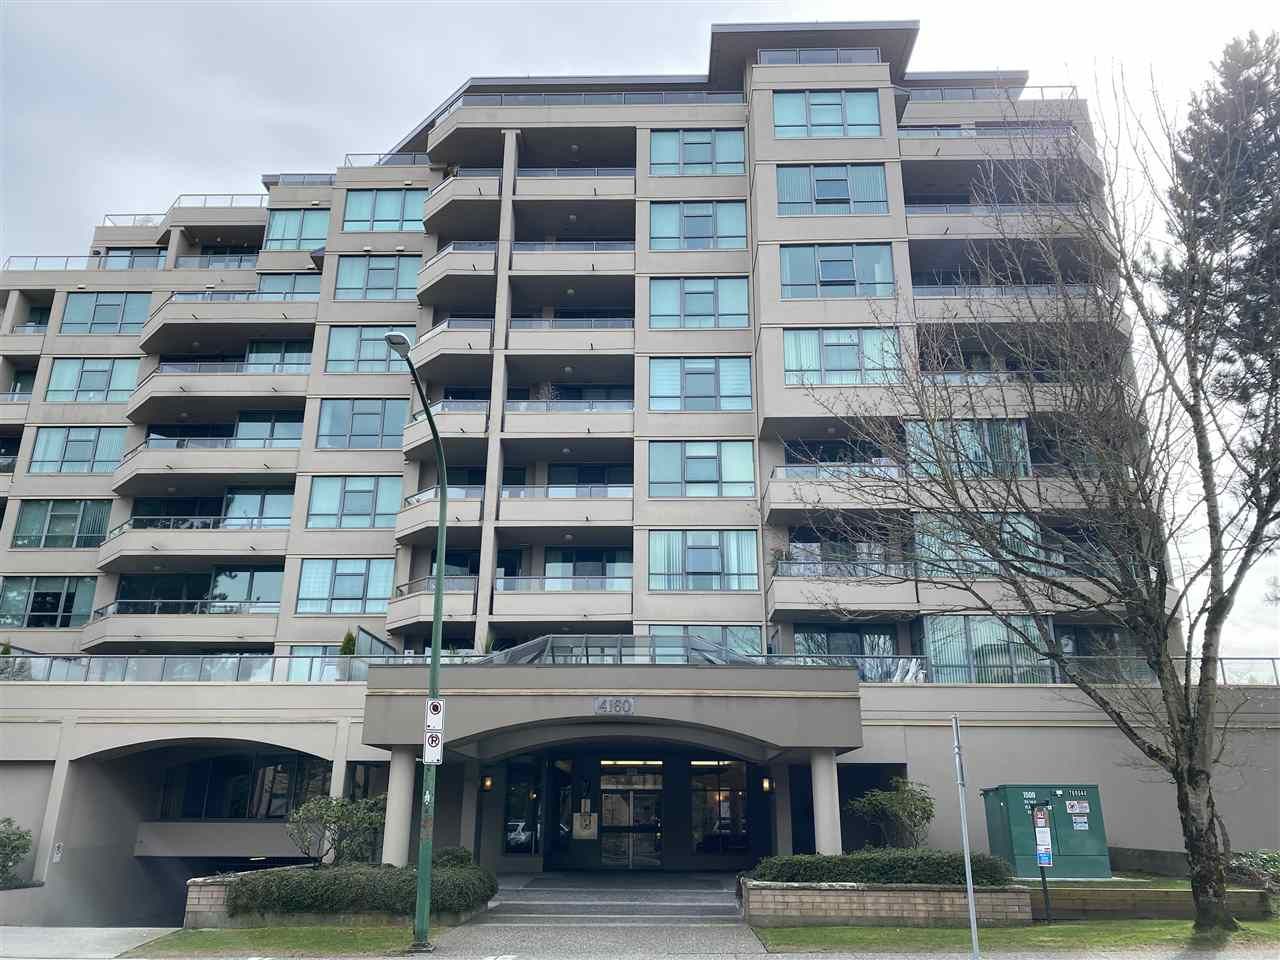 Main Photo: 504 4160 ALBERT Street in Burnaby: Vancouver Heights Condo for sale (Burnaby North)  : MLS®# R2561302